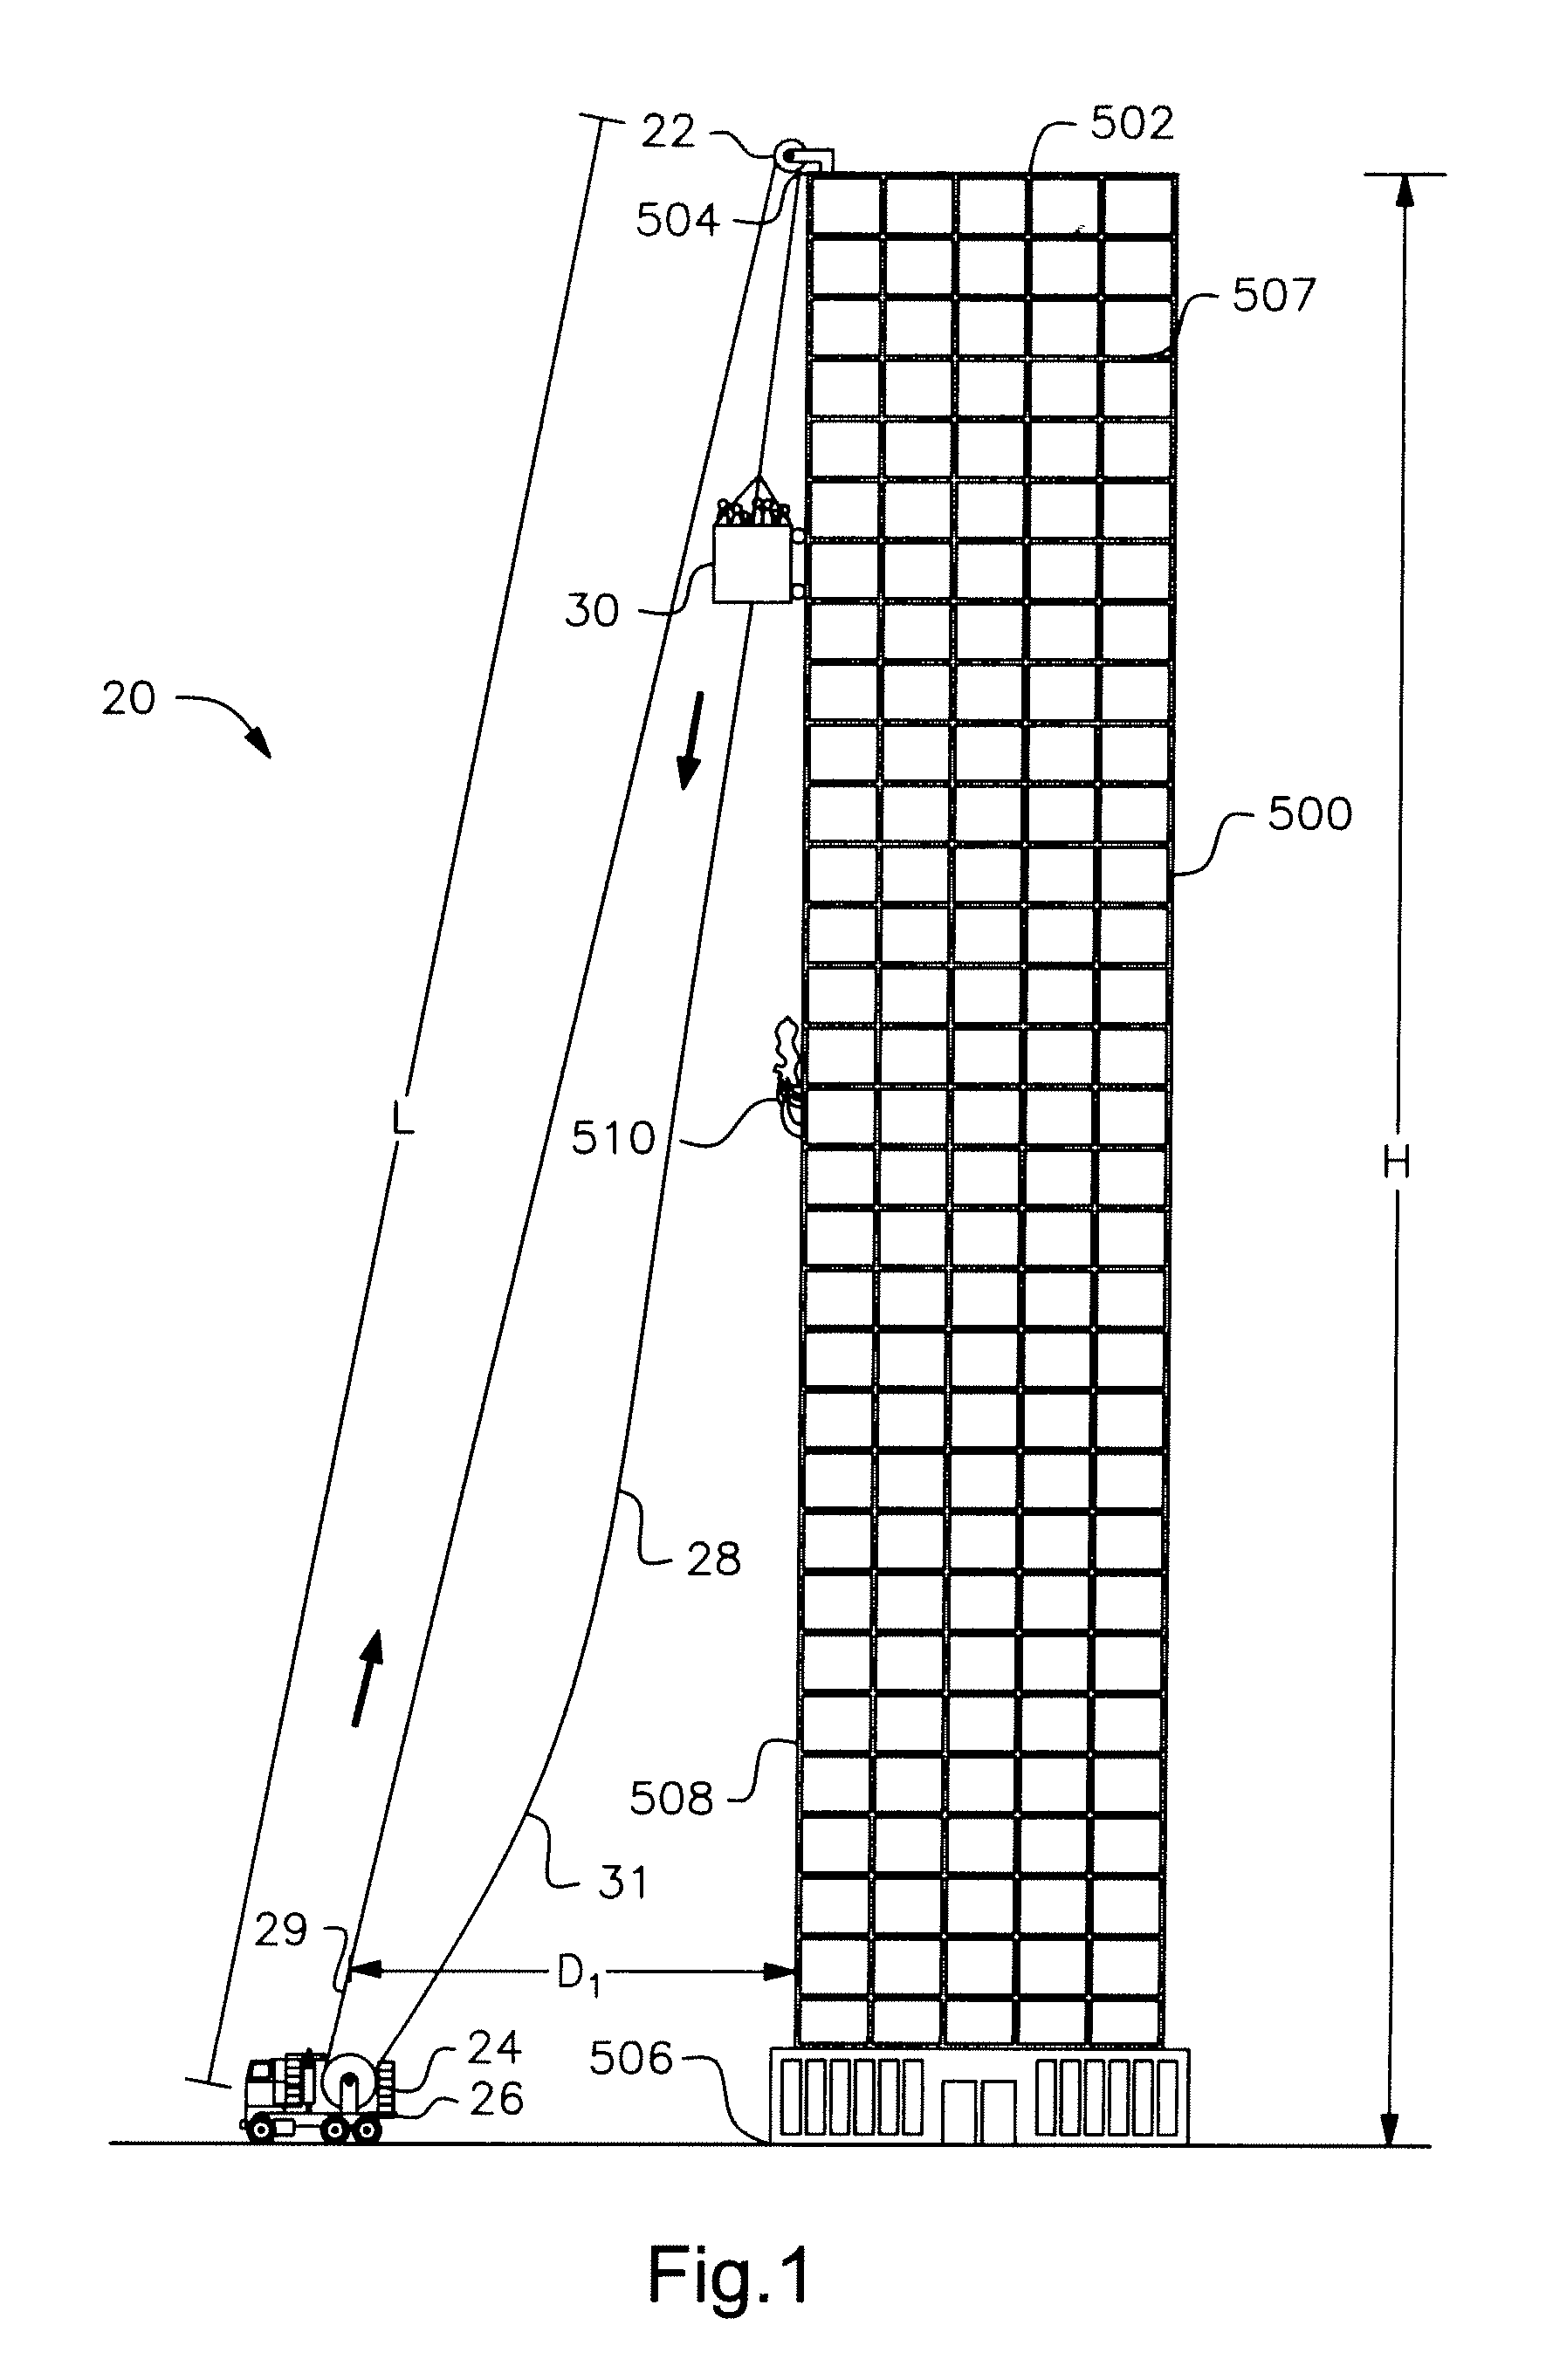 Method and apparatus for reaching from outside an upper level of a tall structure